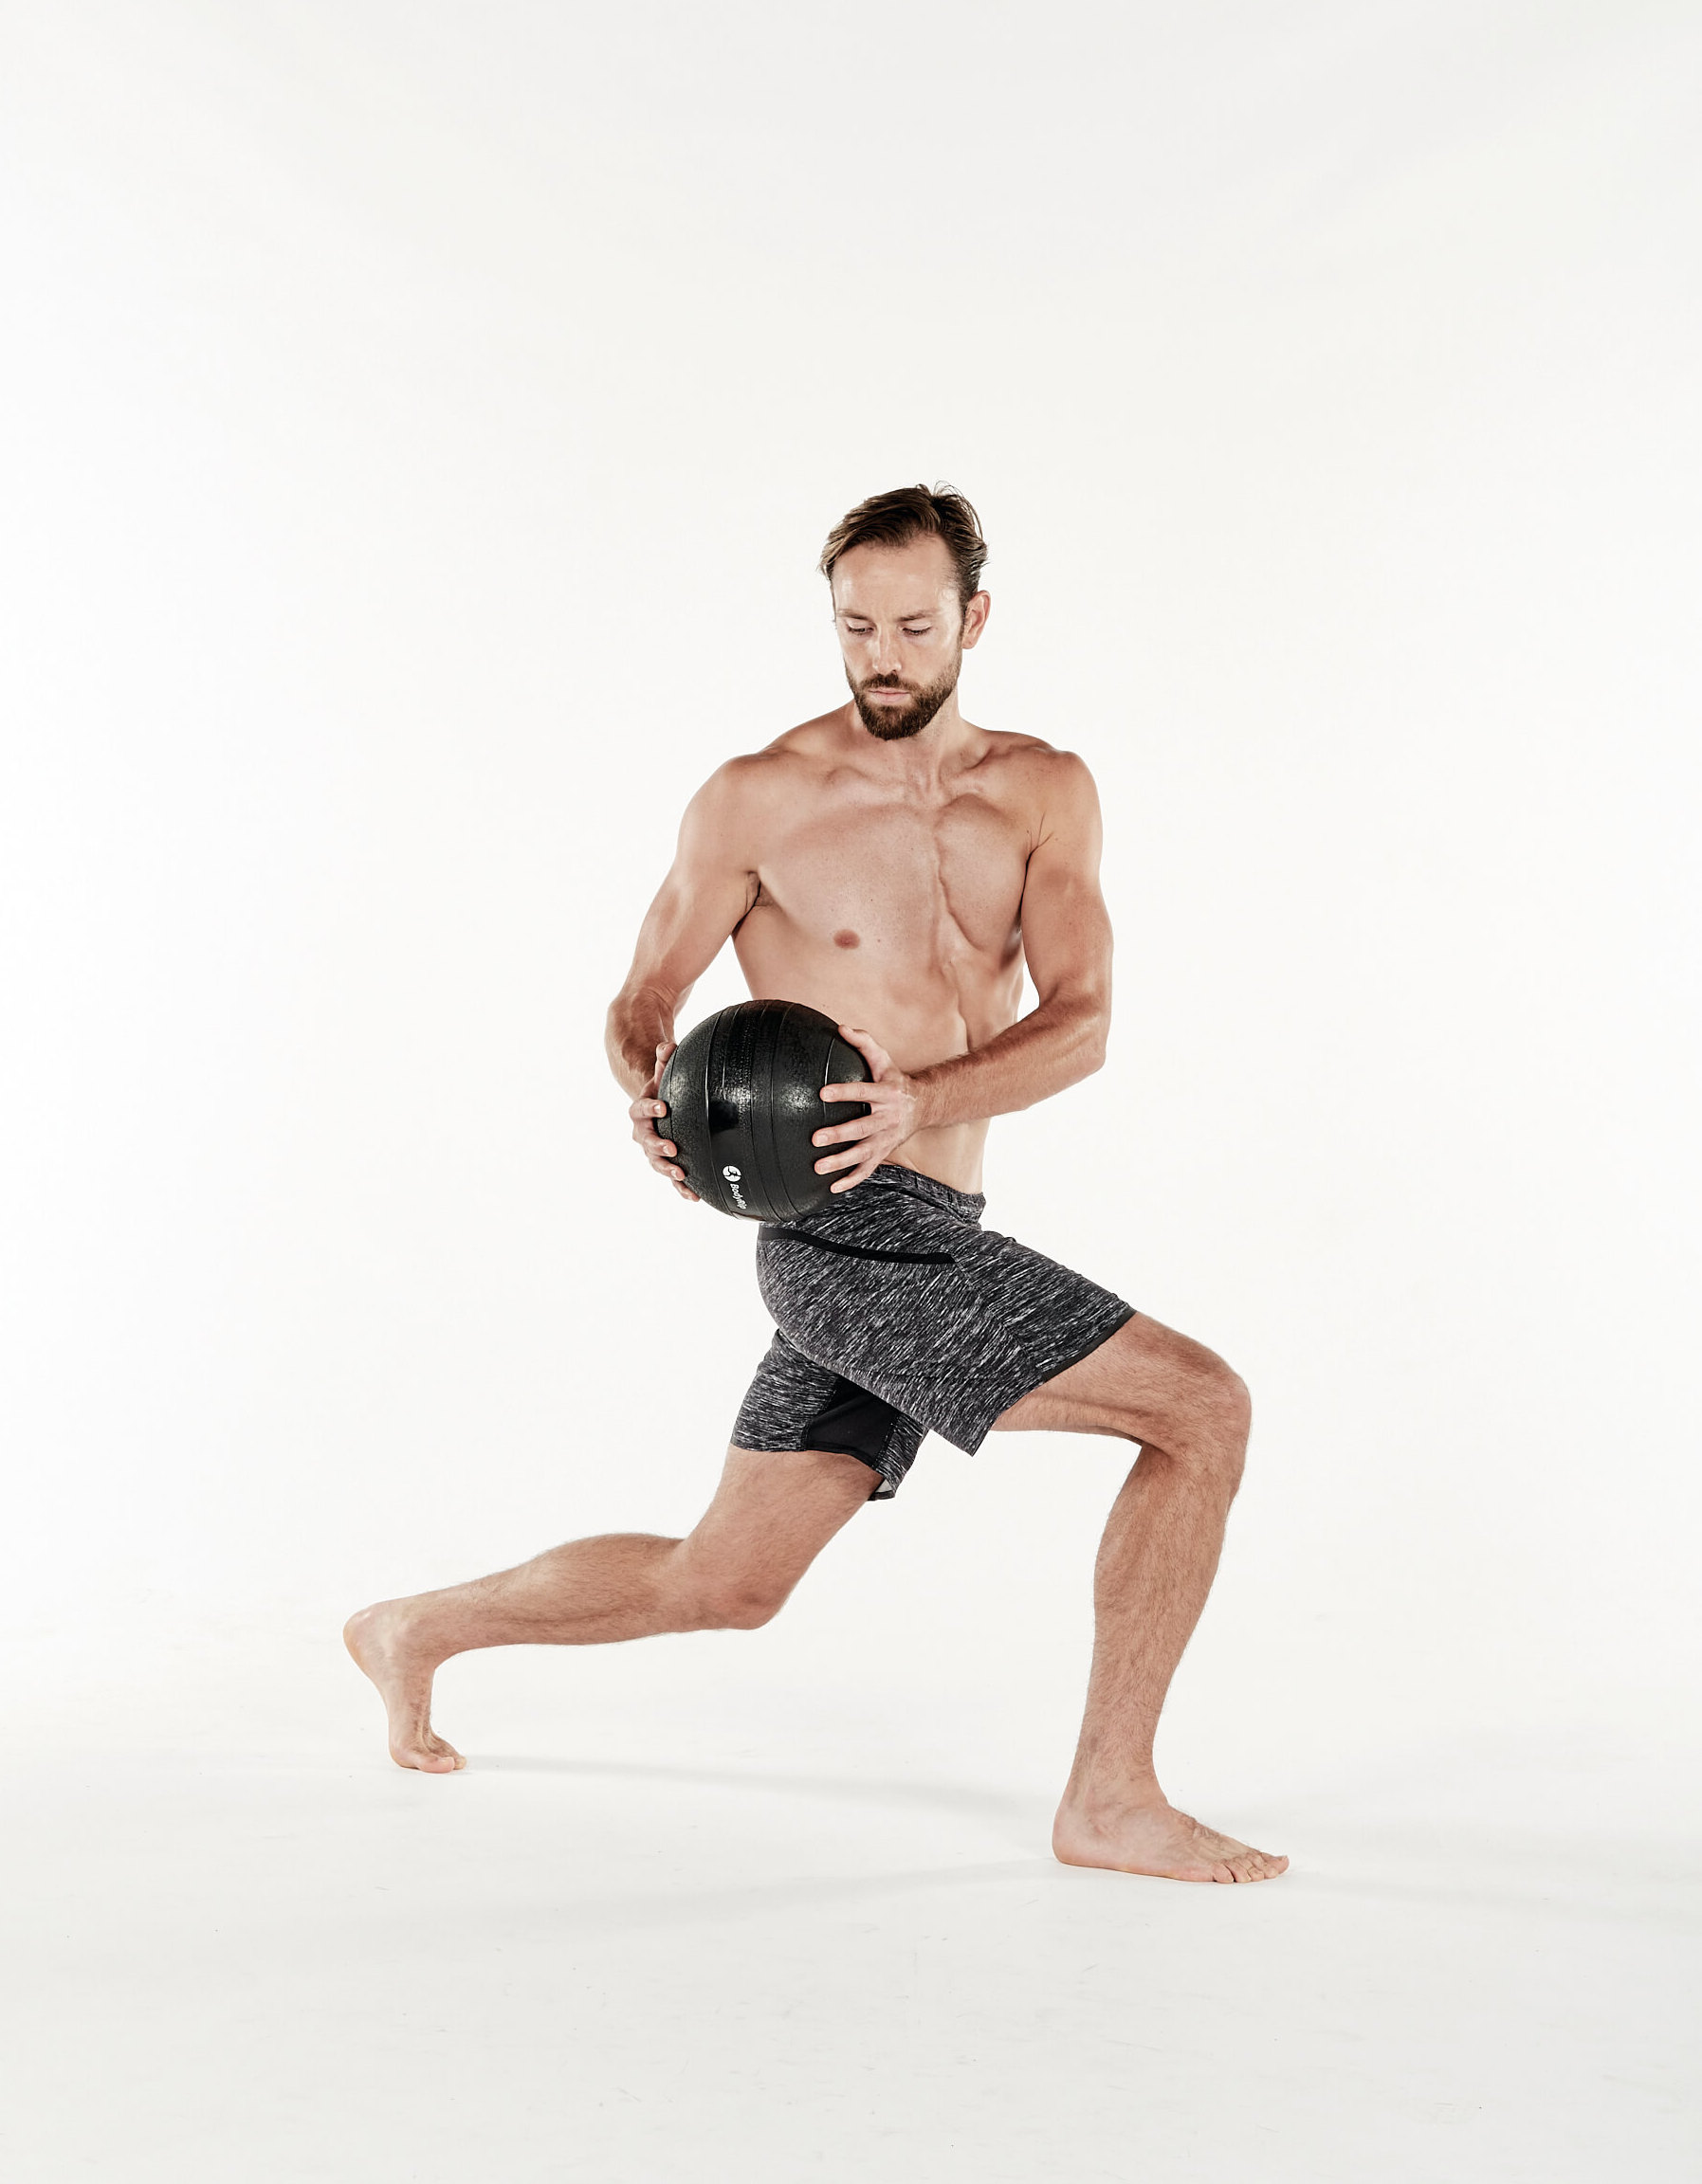 Find Full-Body Fitness With This Medicine Ball Workout | Men's Fitness UK